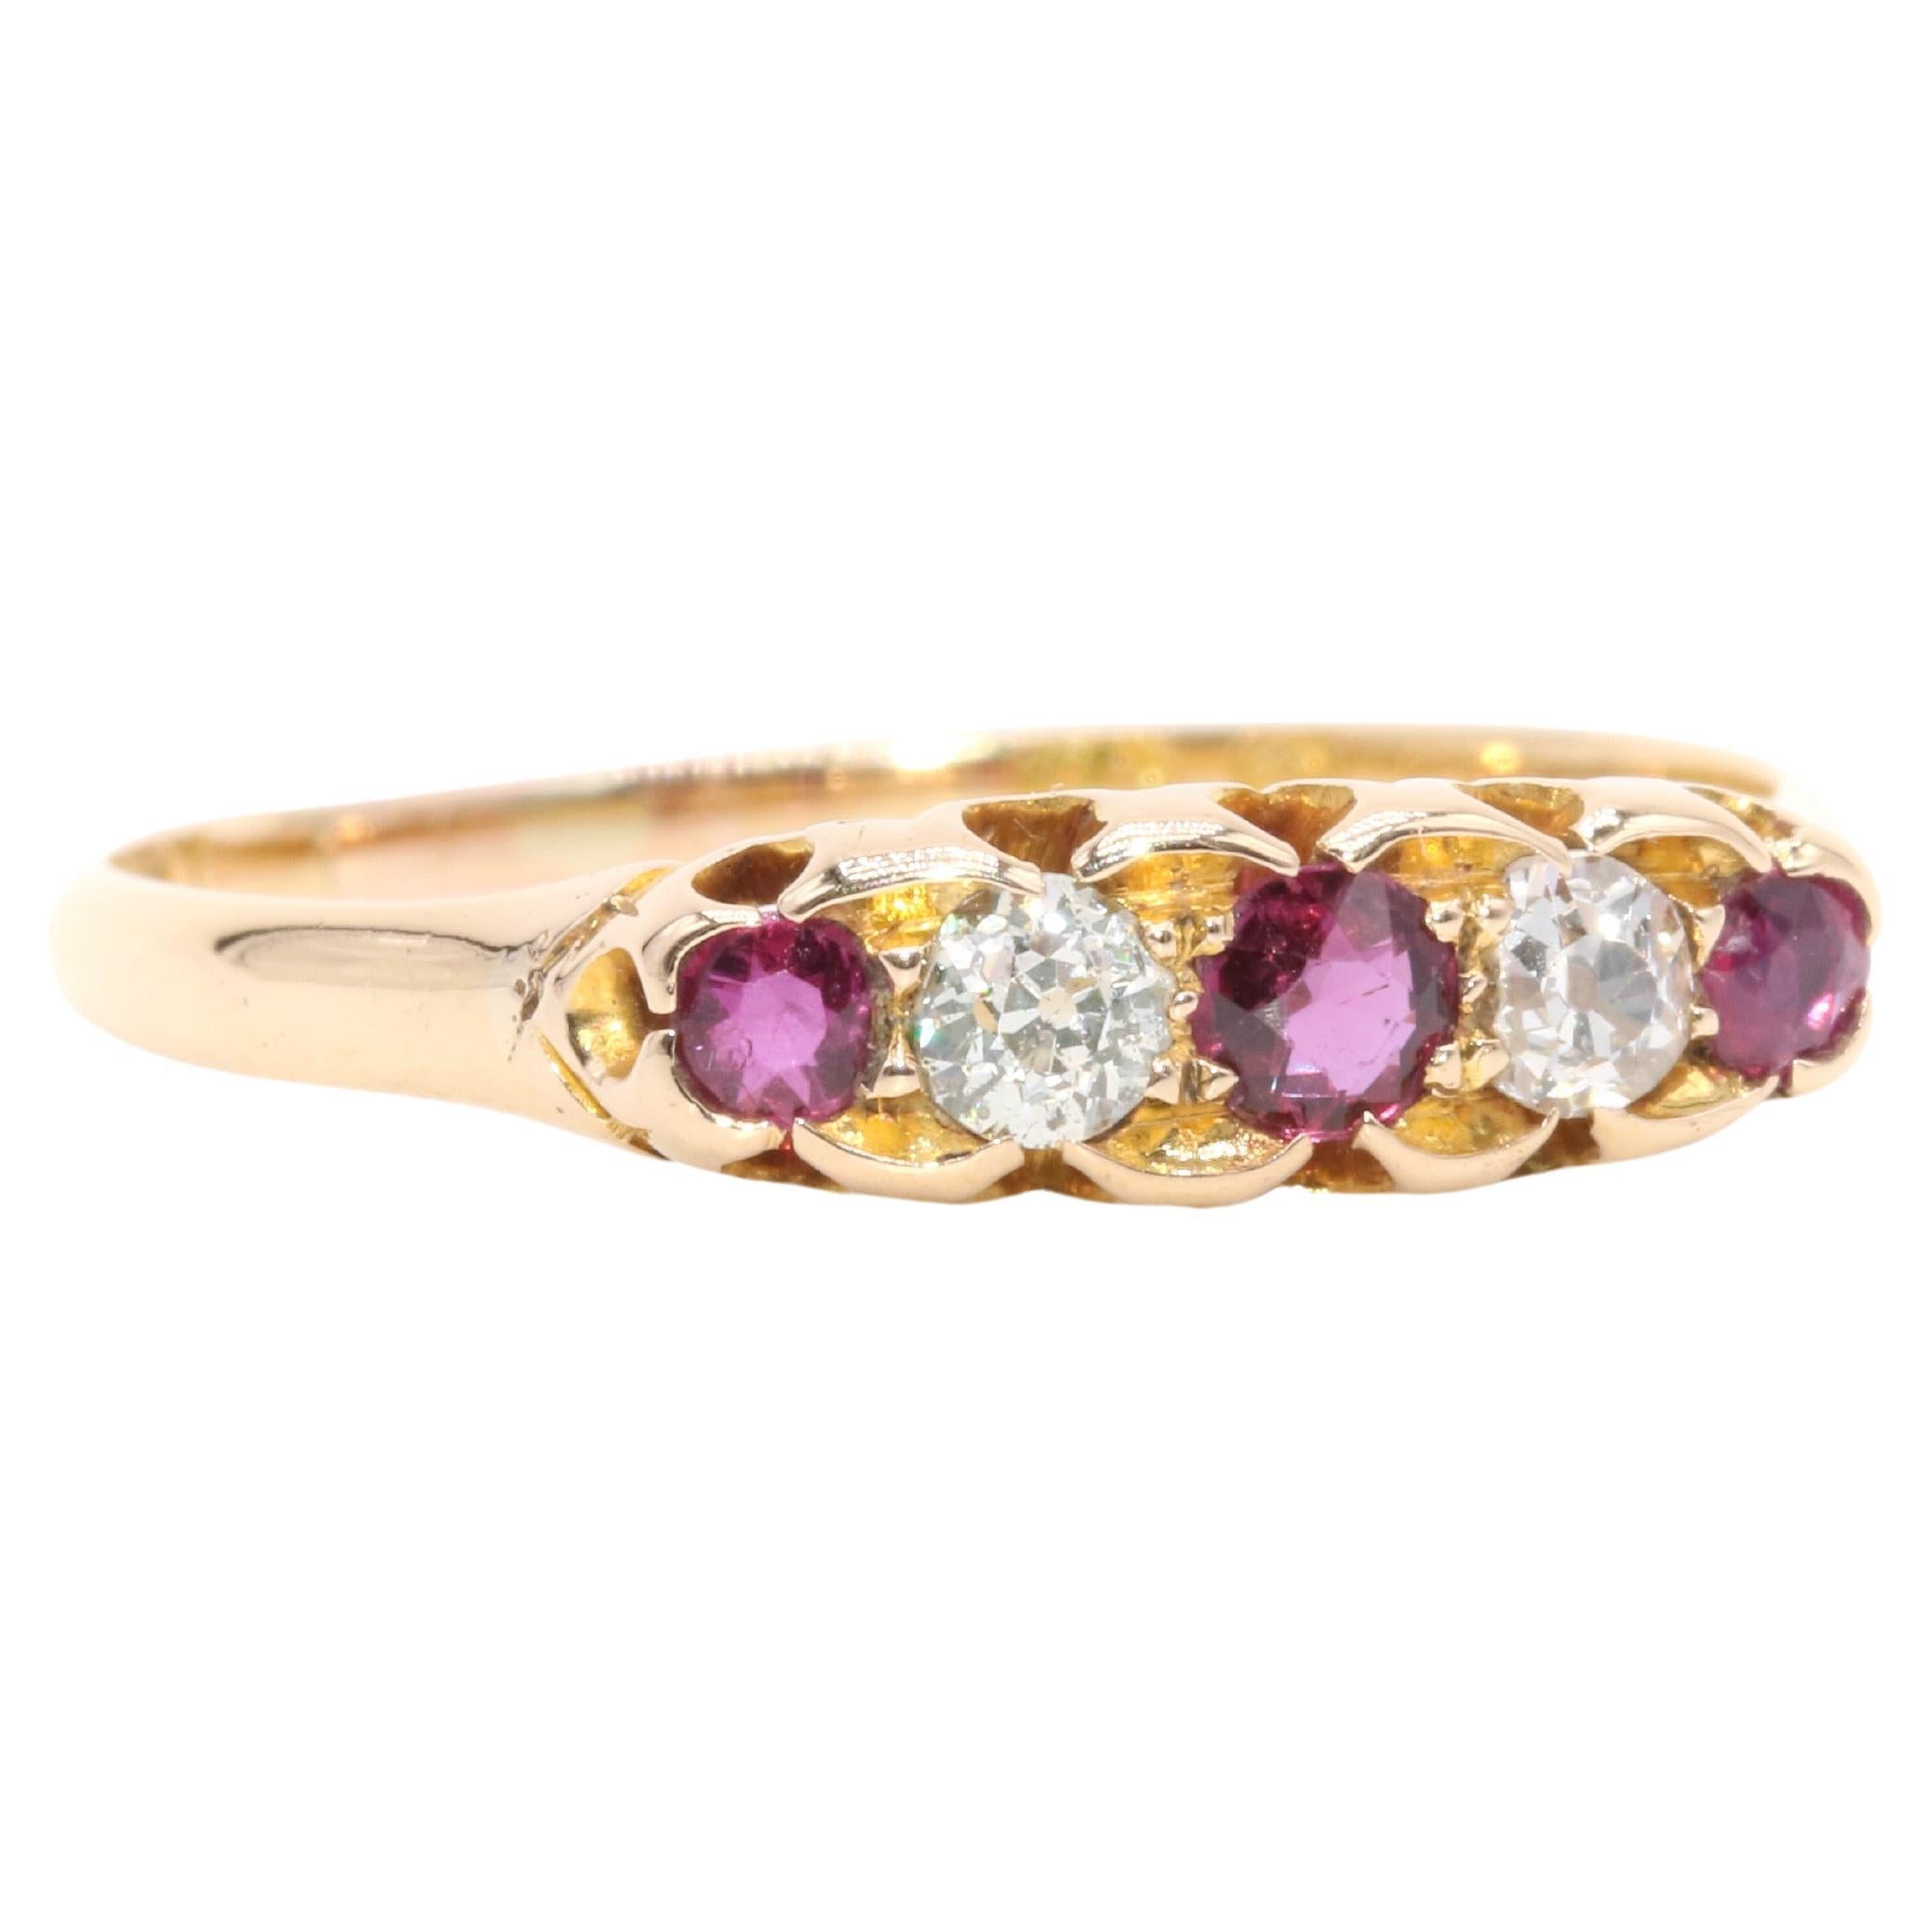 Antique Victorian 18K Yellow Gold 0.45tgw Ruby and Old Cut Diamond 5 Stone Ring